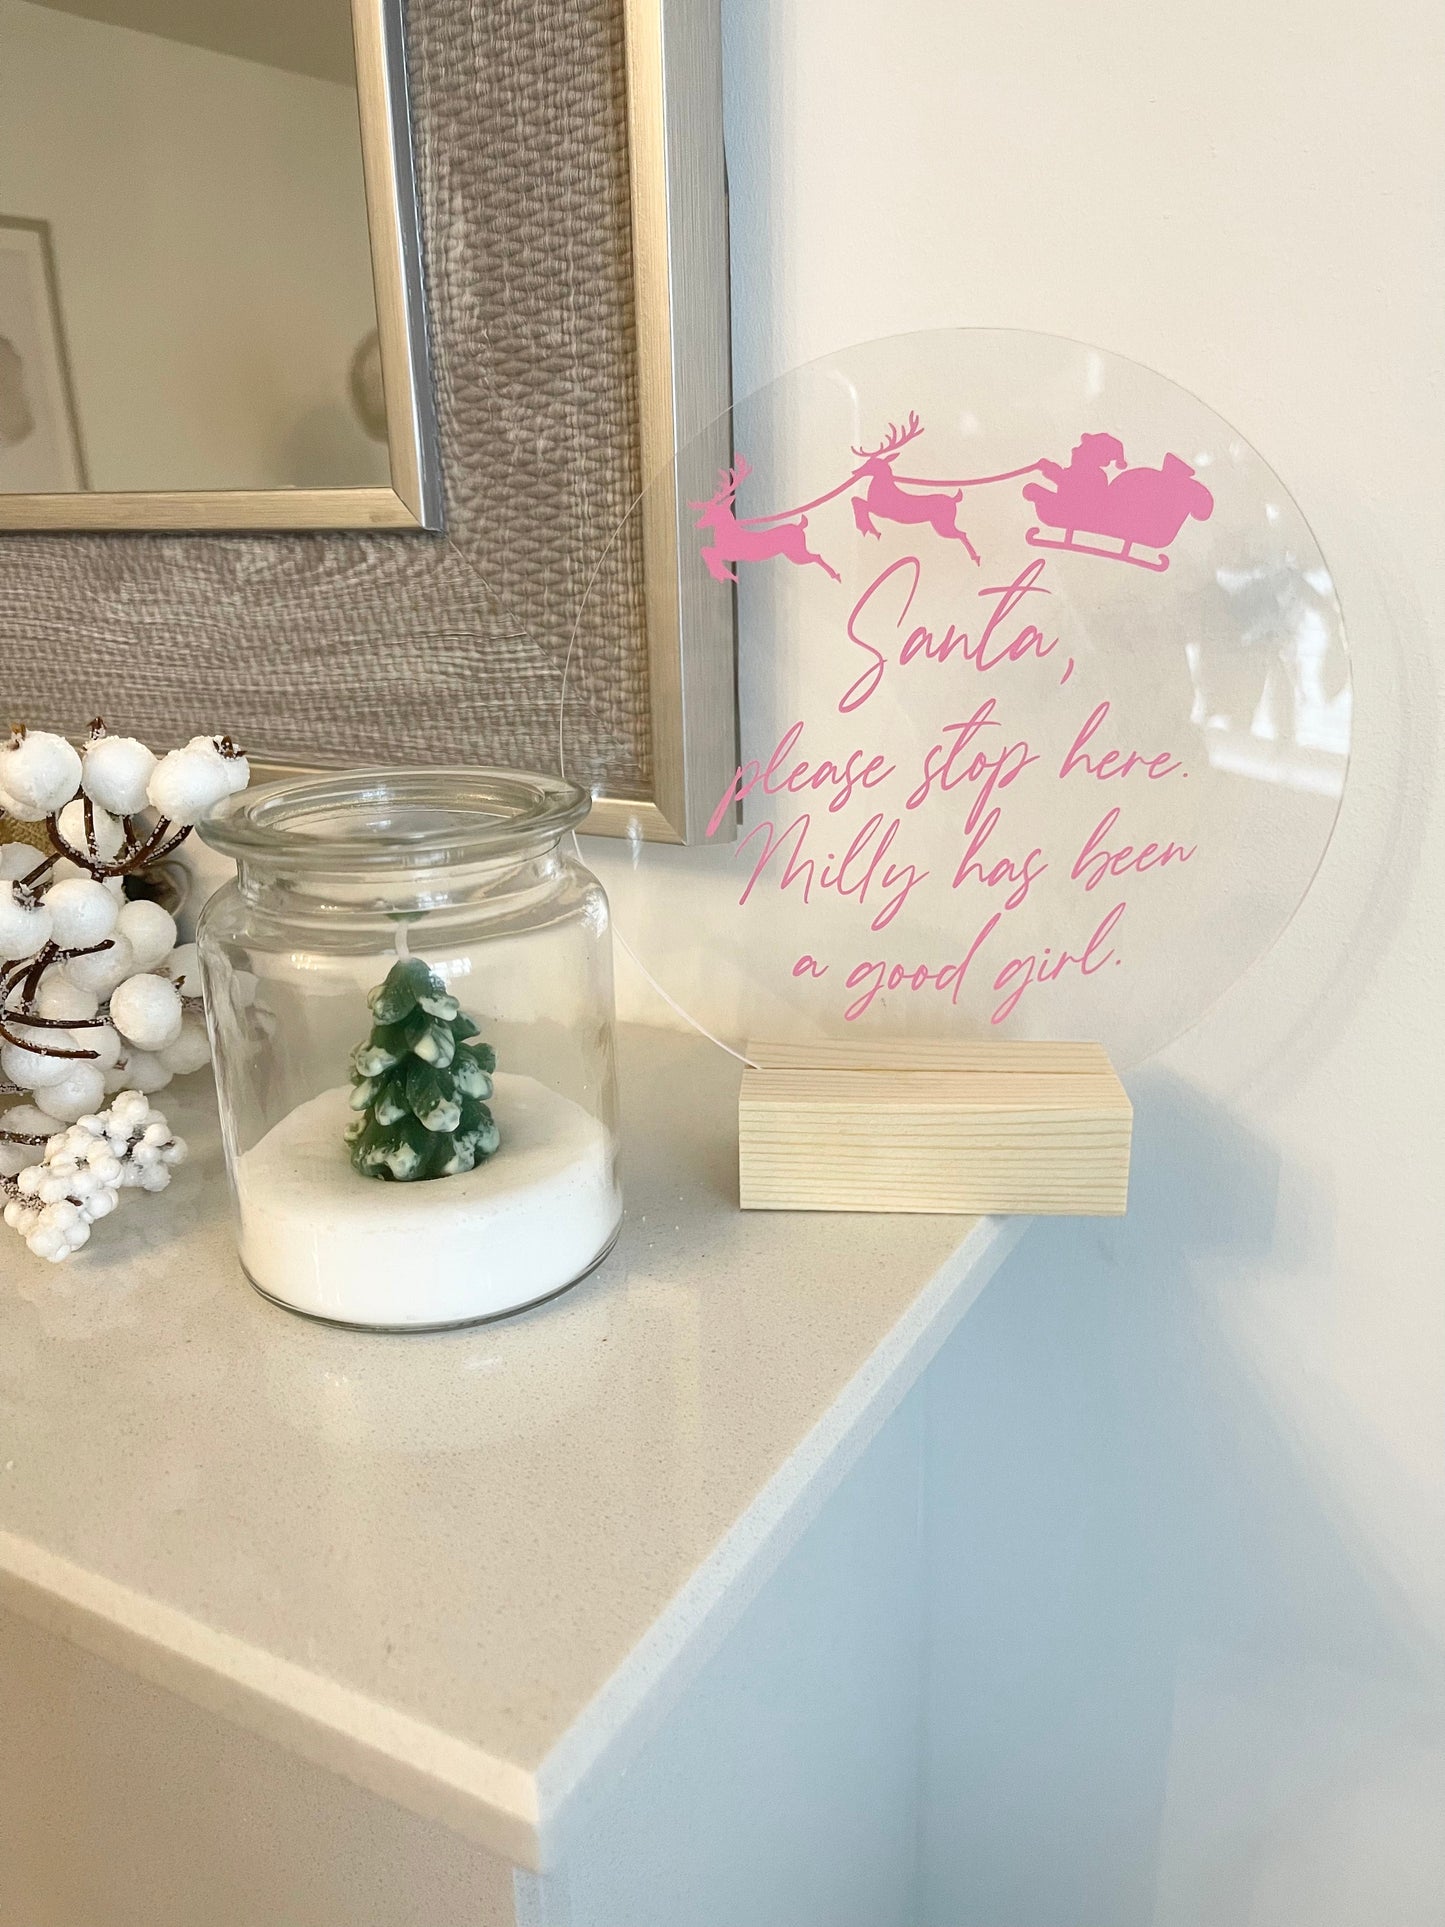 Santa Please Stop Here Custom Name Christmas Acrylic Plaque Sign With Wooden Base